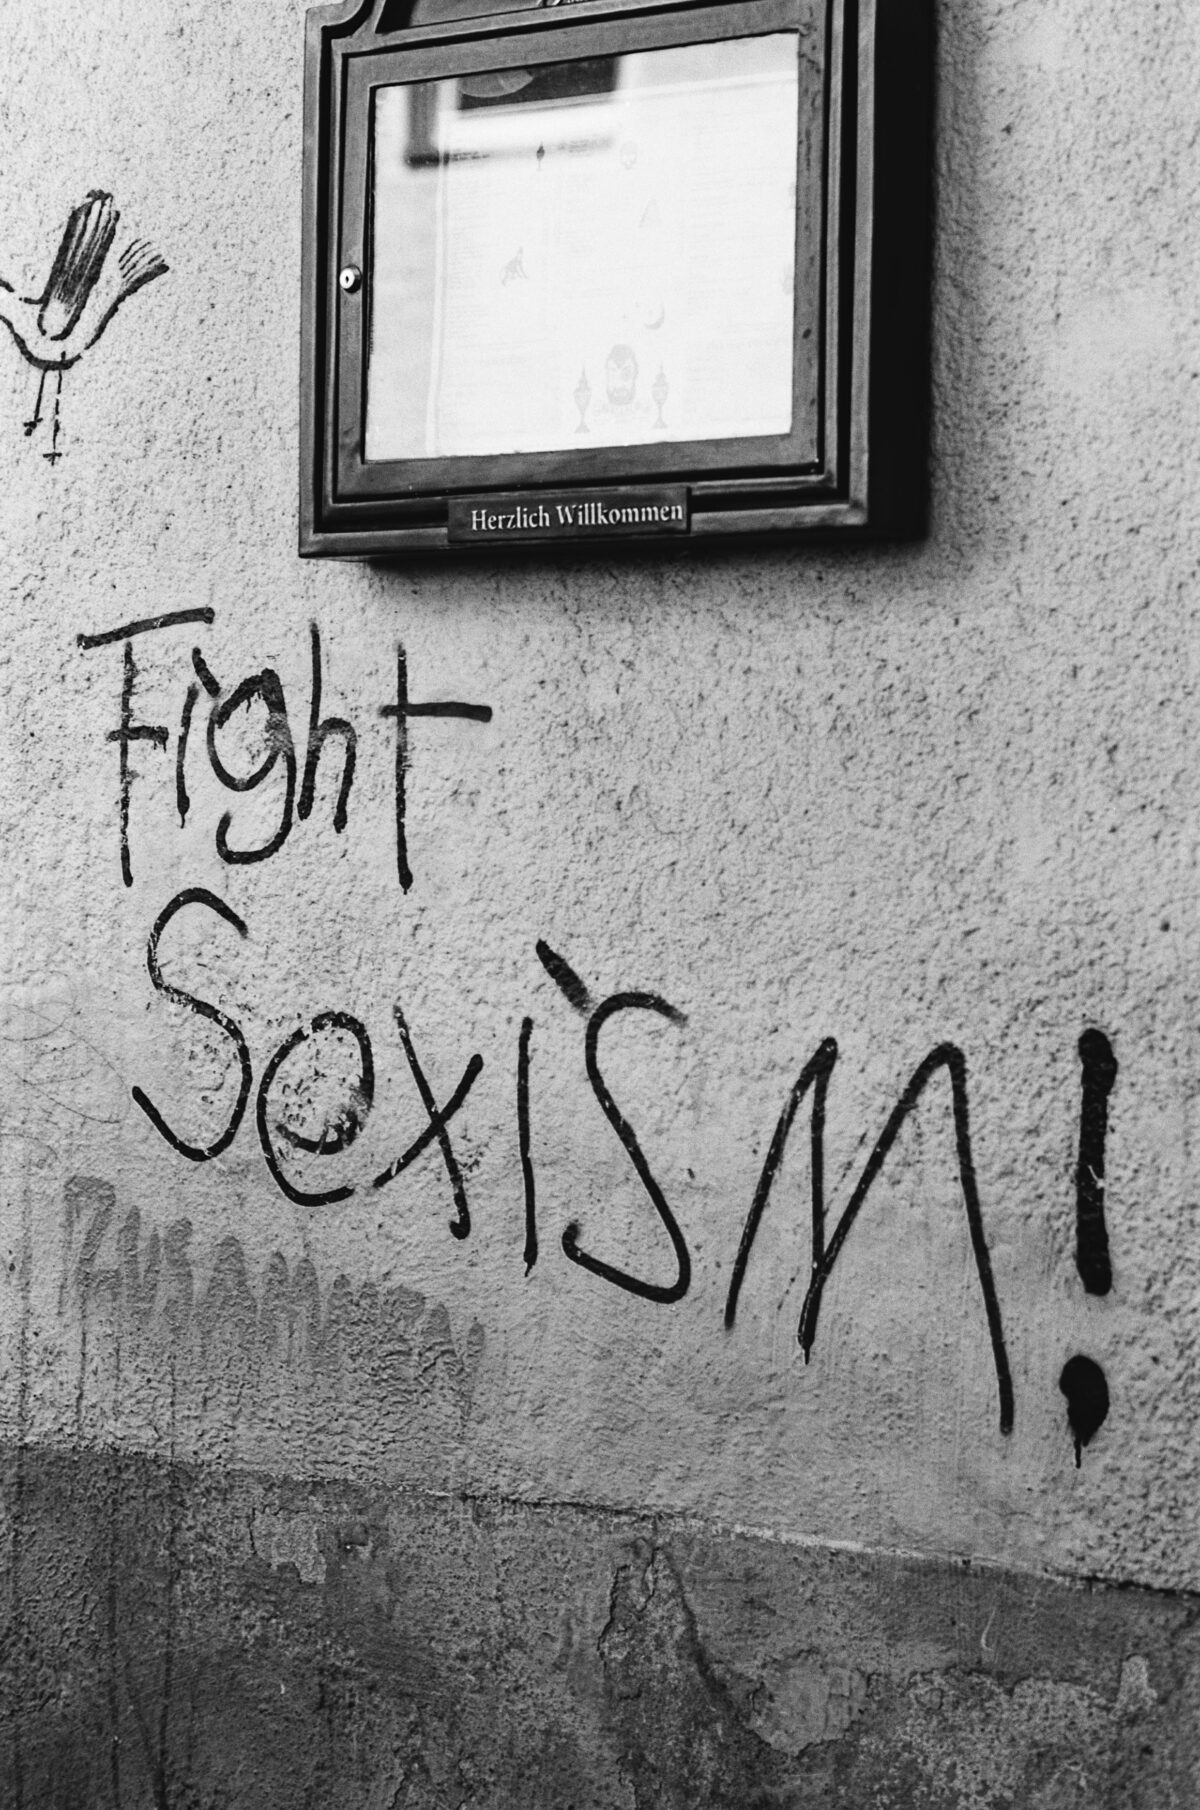 Sign on wall that says "Fight Sexism."